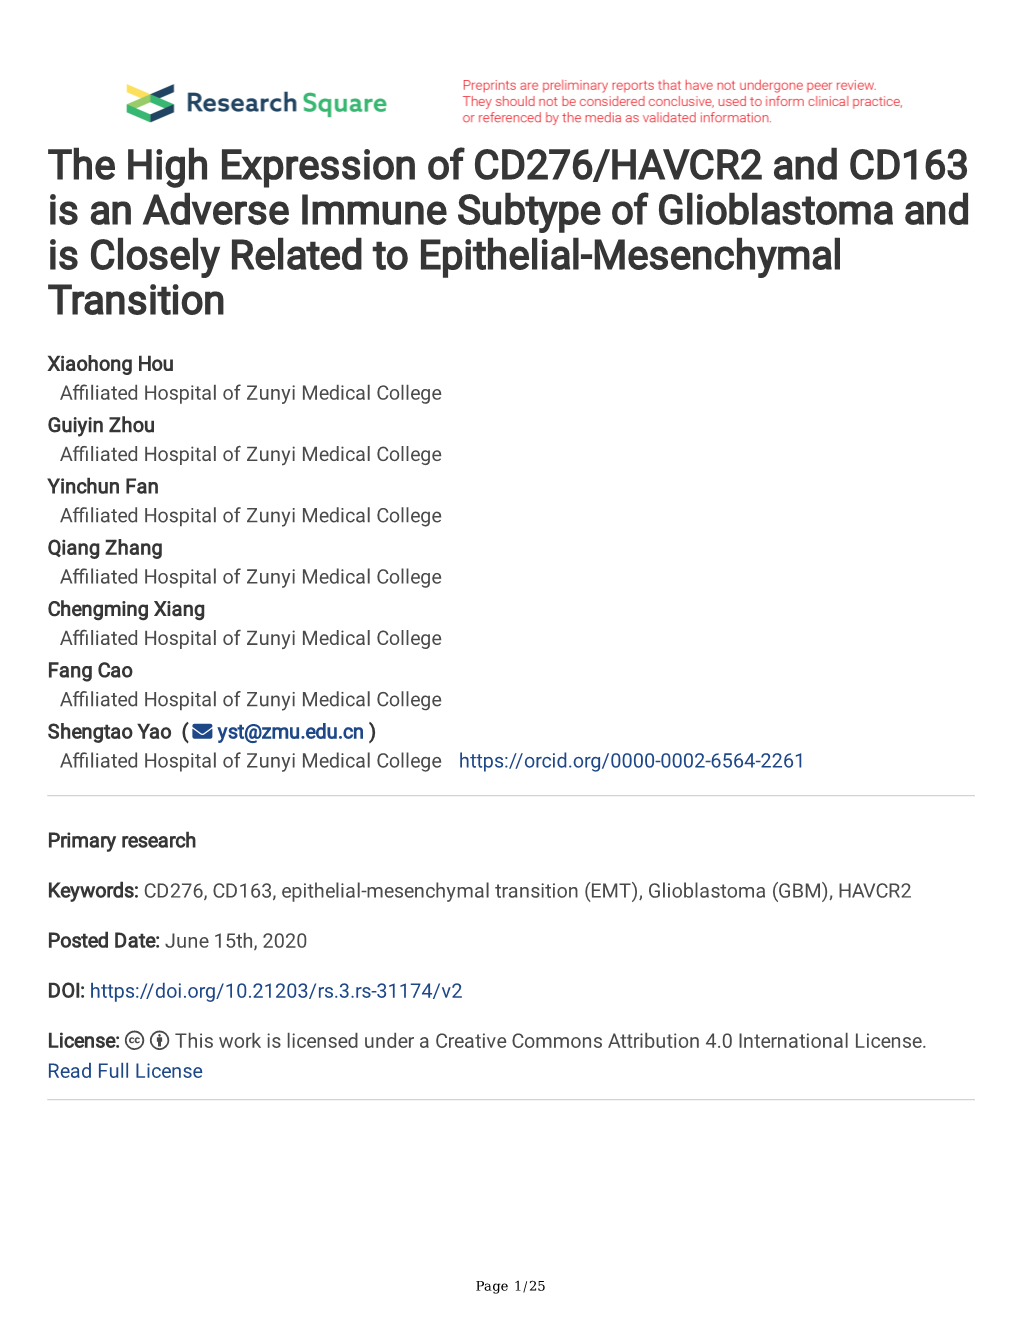 The High Expression of CD276/HAVCR2 and CD163 Is an Adverse Immune Subtype of Glioblastoma and Is Closely Related to Epithelial-Mesenchymal Transition